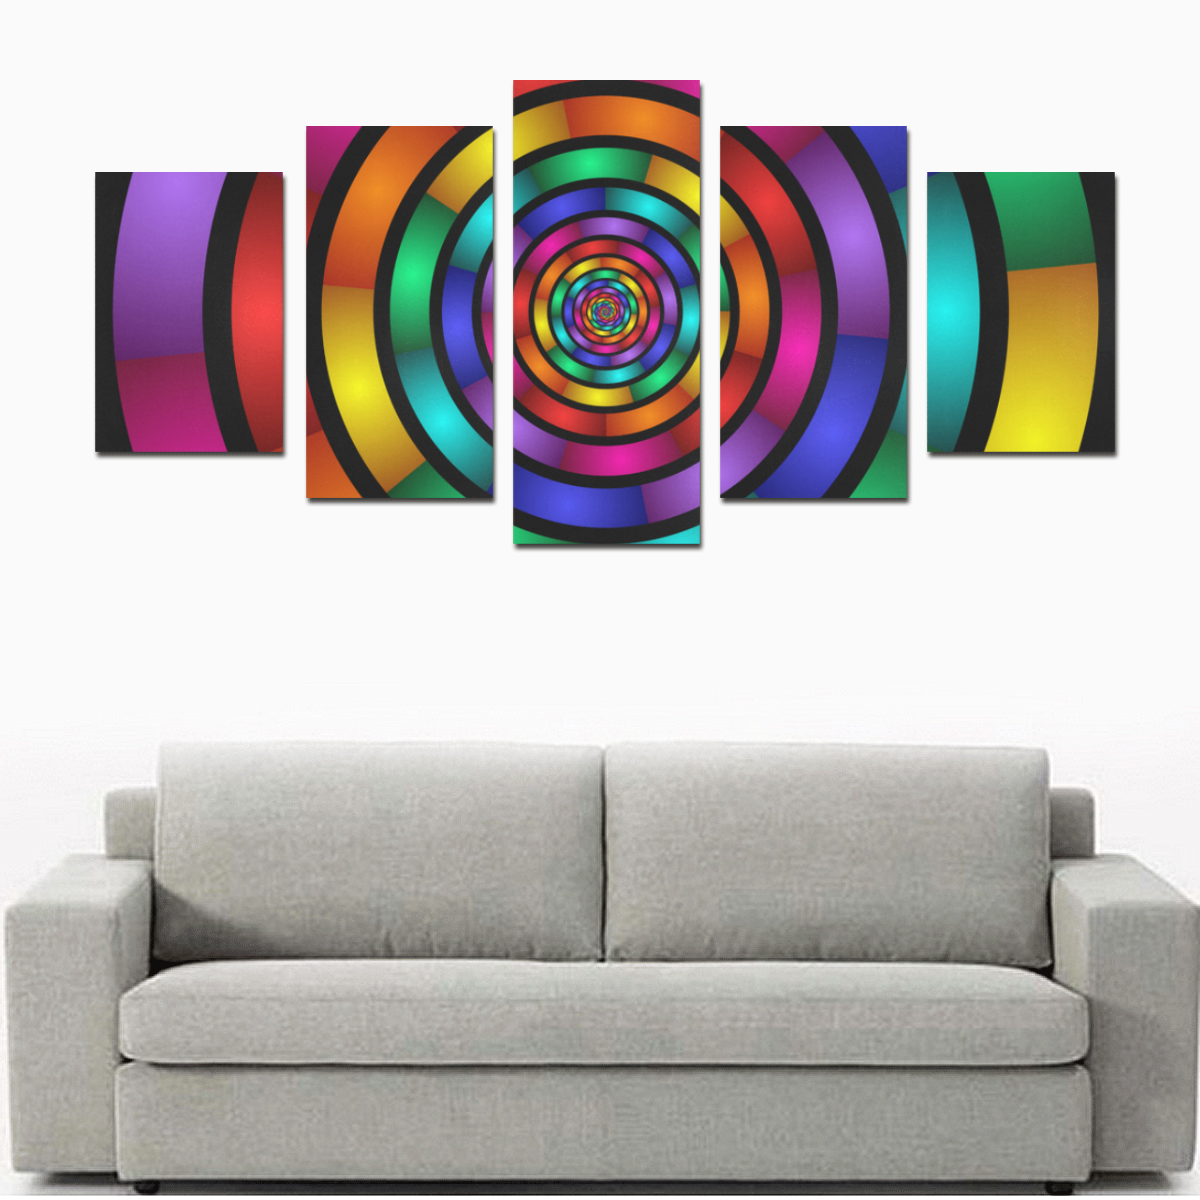 Round Psychedelic Colorful Modern Fractal Graphic Canvas Print Sets D (No Frame)